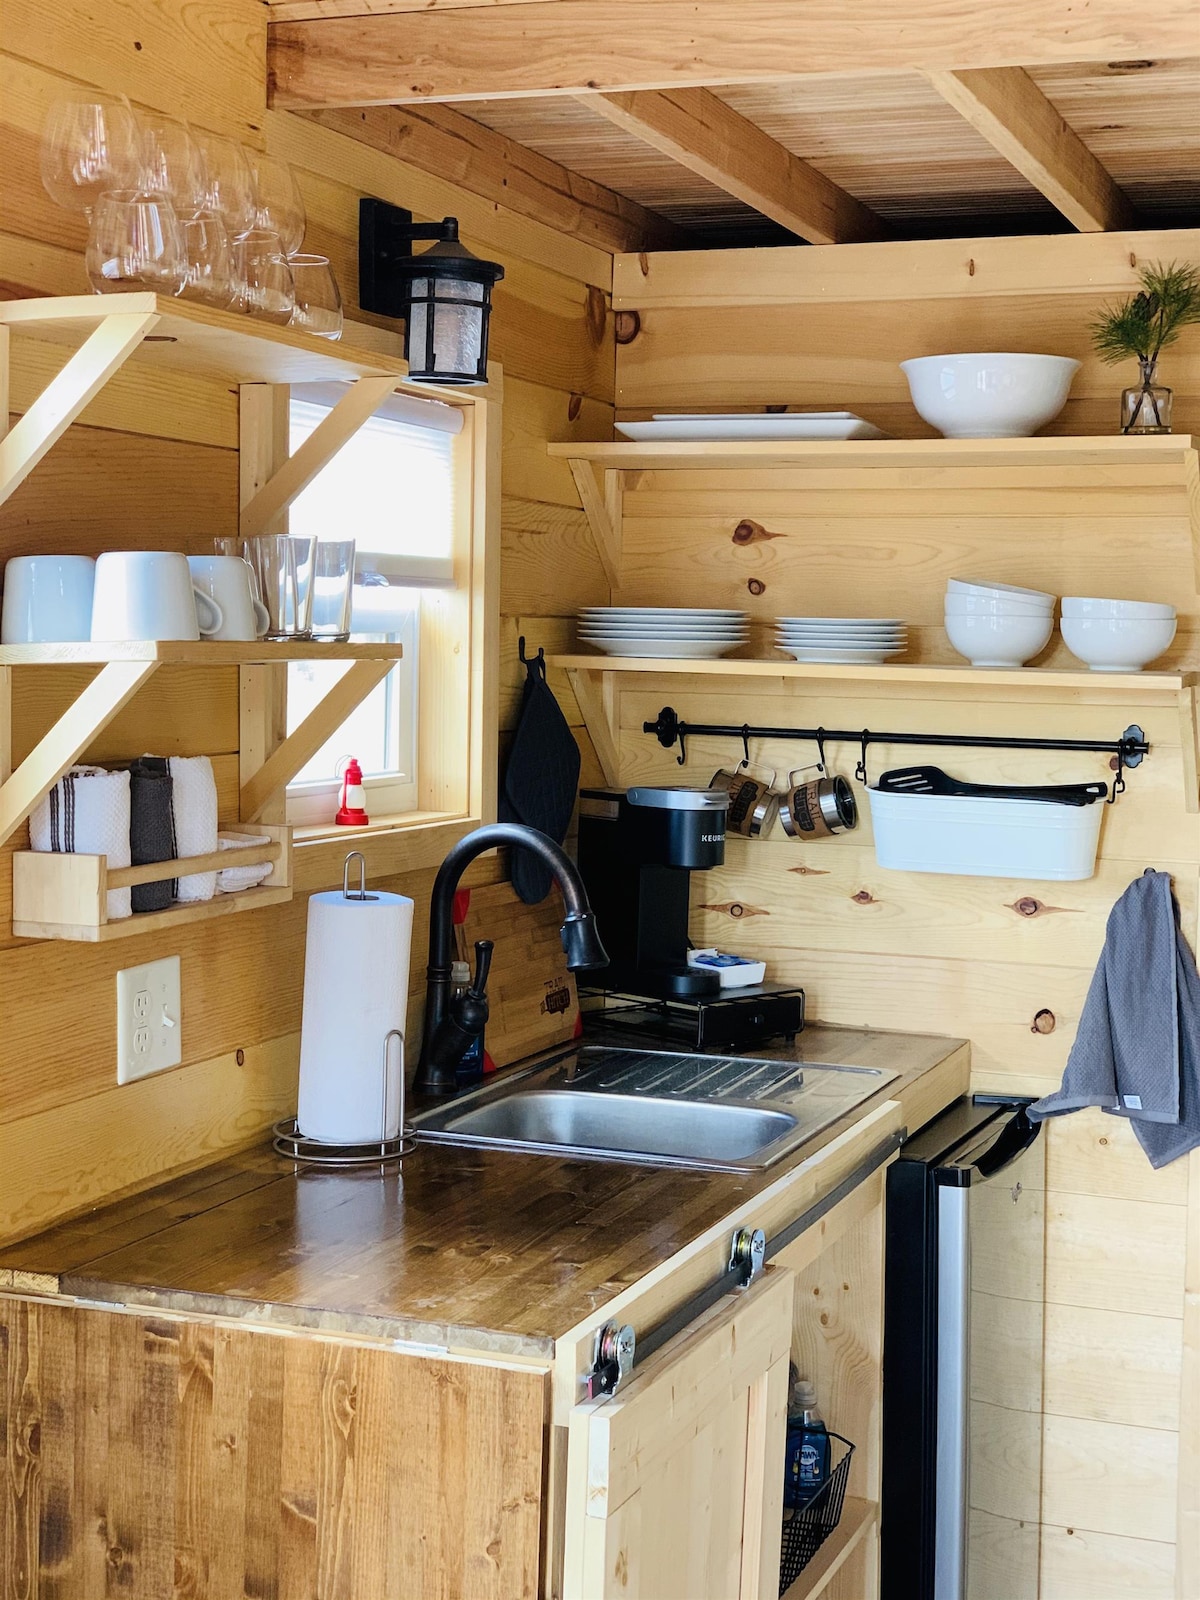 Meadow Loop Tiny Home at Trail and Hitch